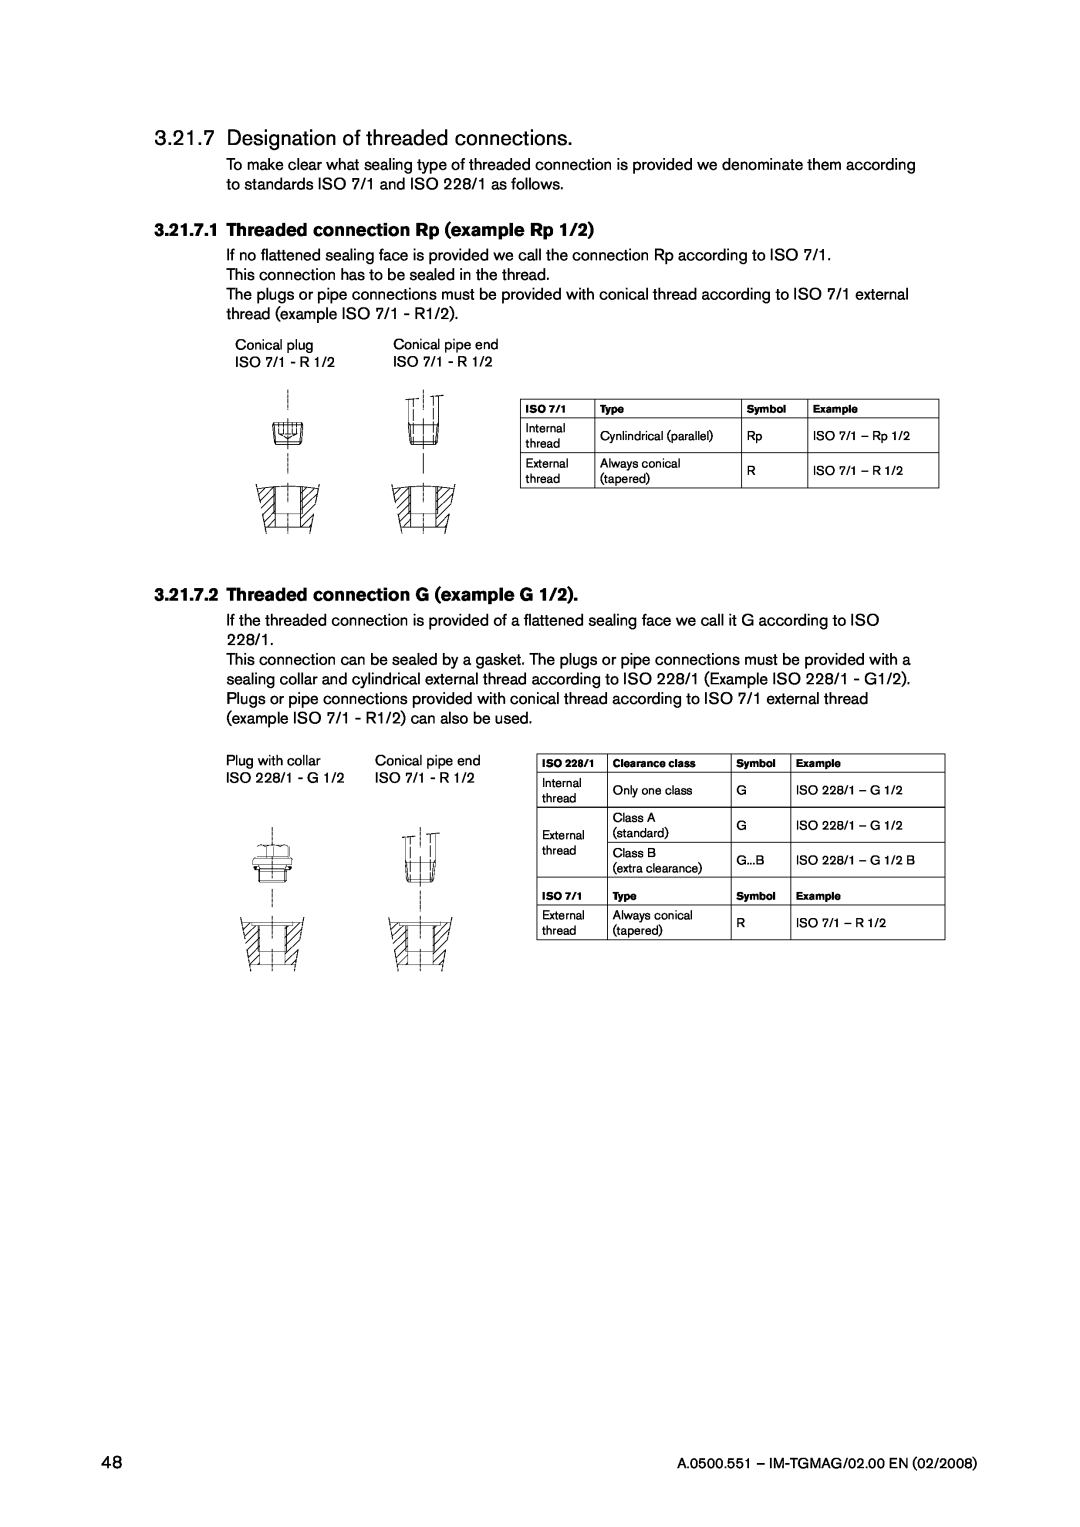 SPX Cooling Technologies TG MAG23-65 Designation of threaded connections, 3.21.7.1Threaded connection Rp example Rp 1/2 